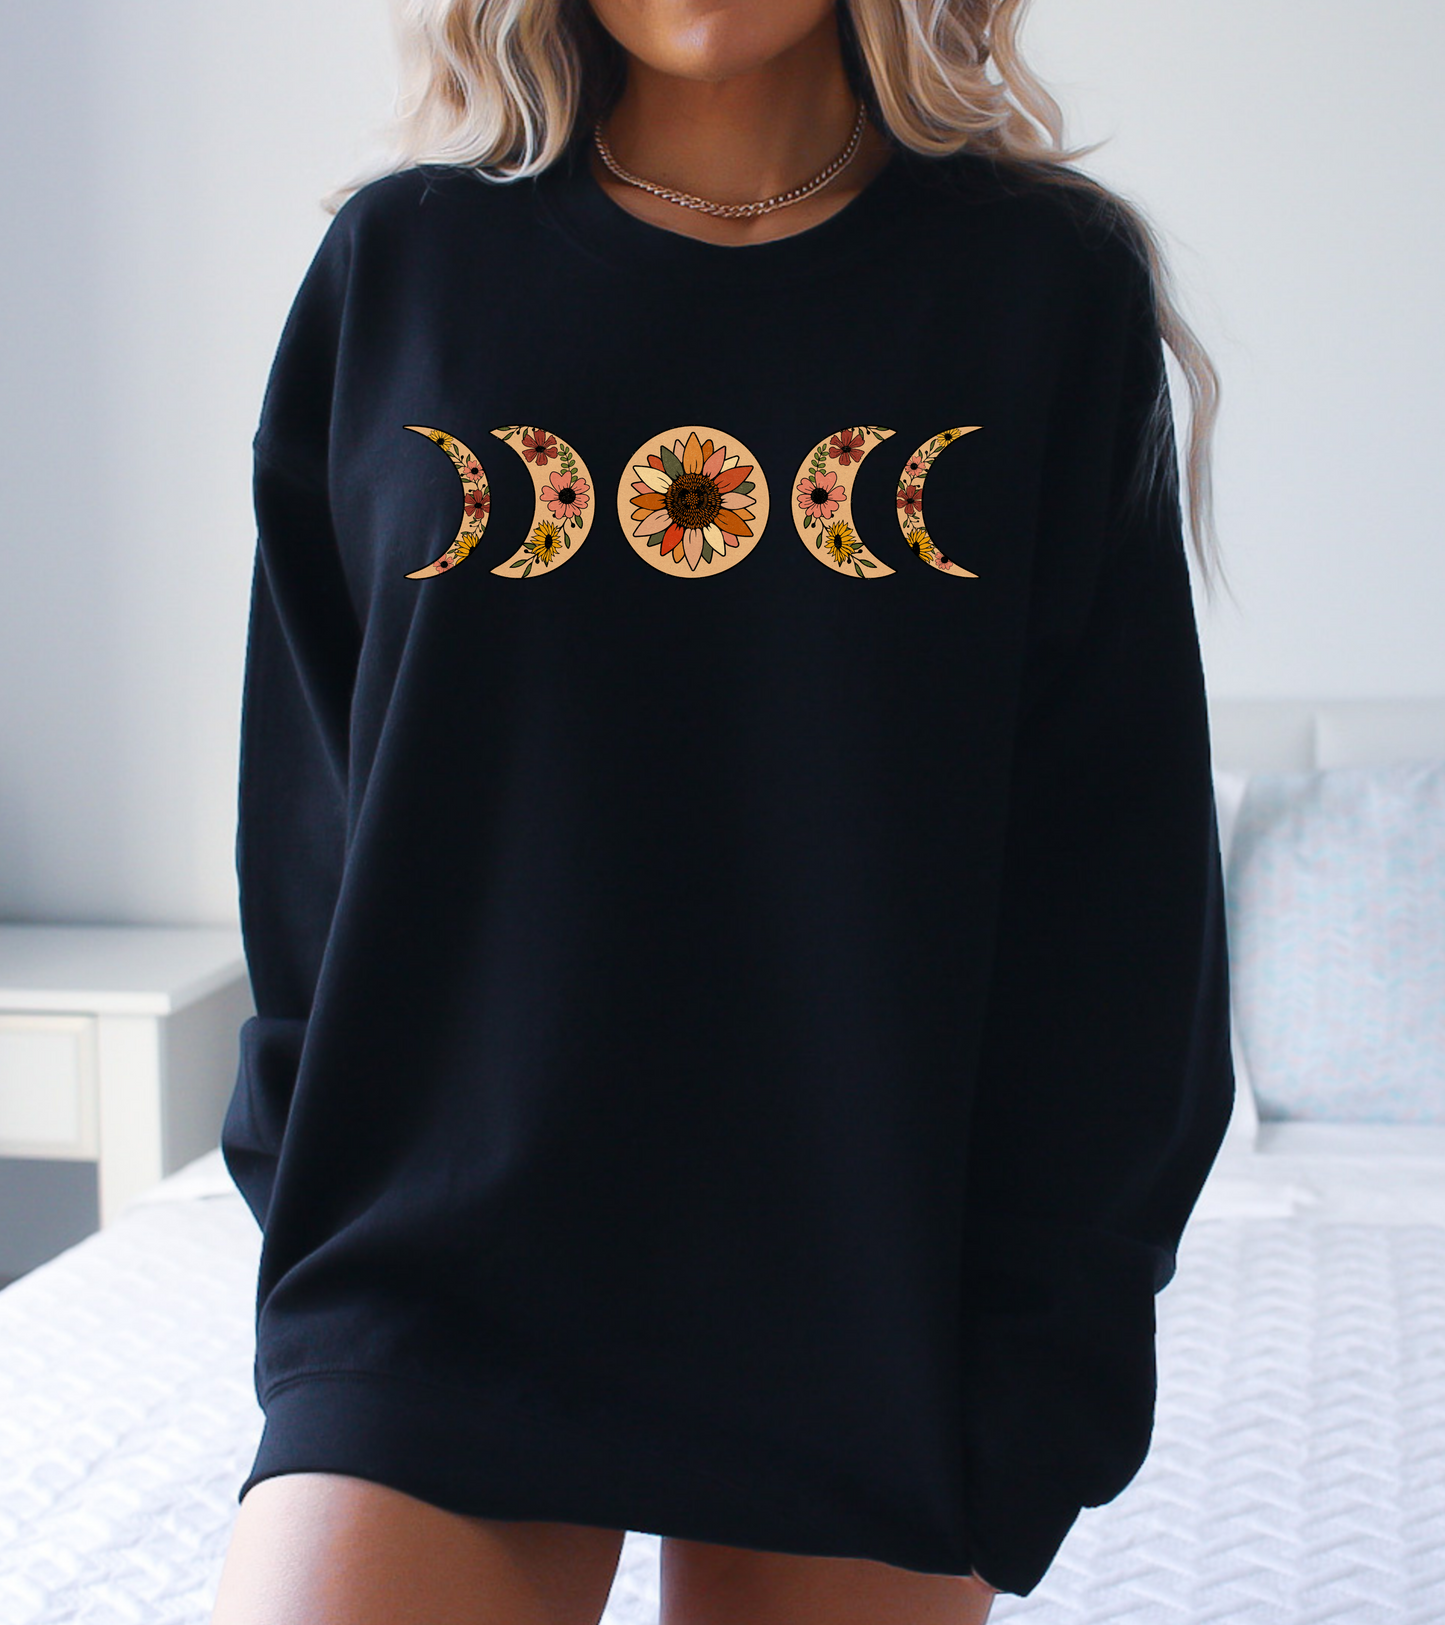 Floral Moon Phases